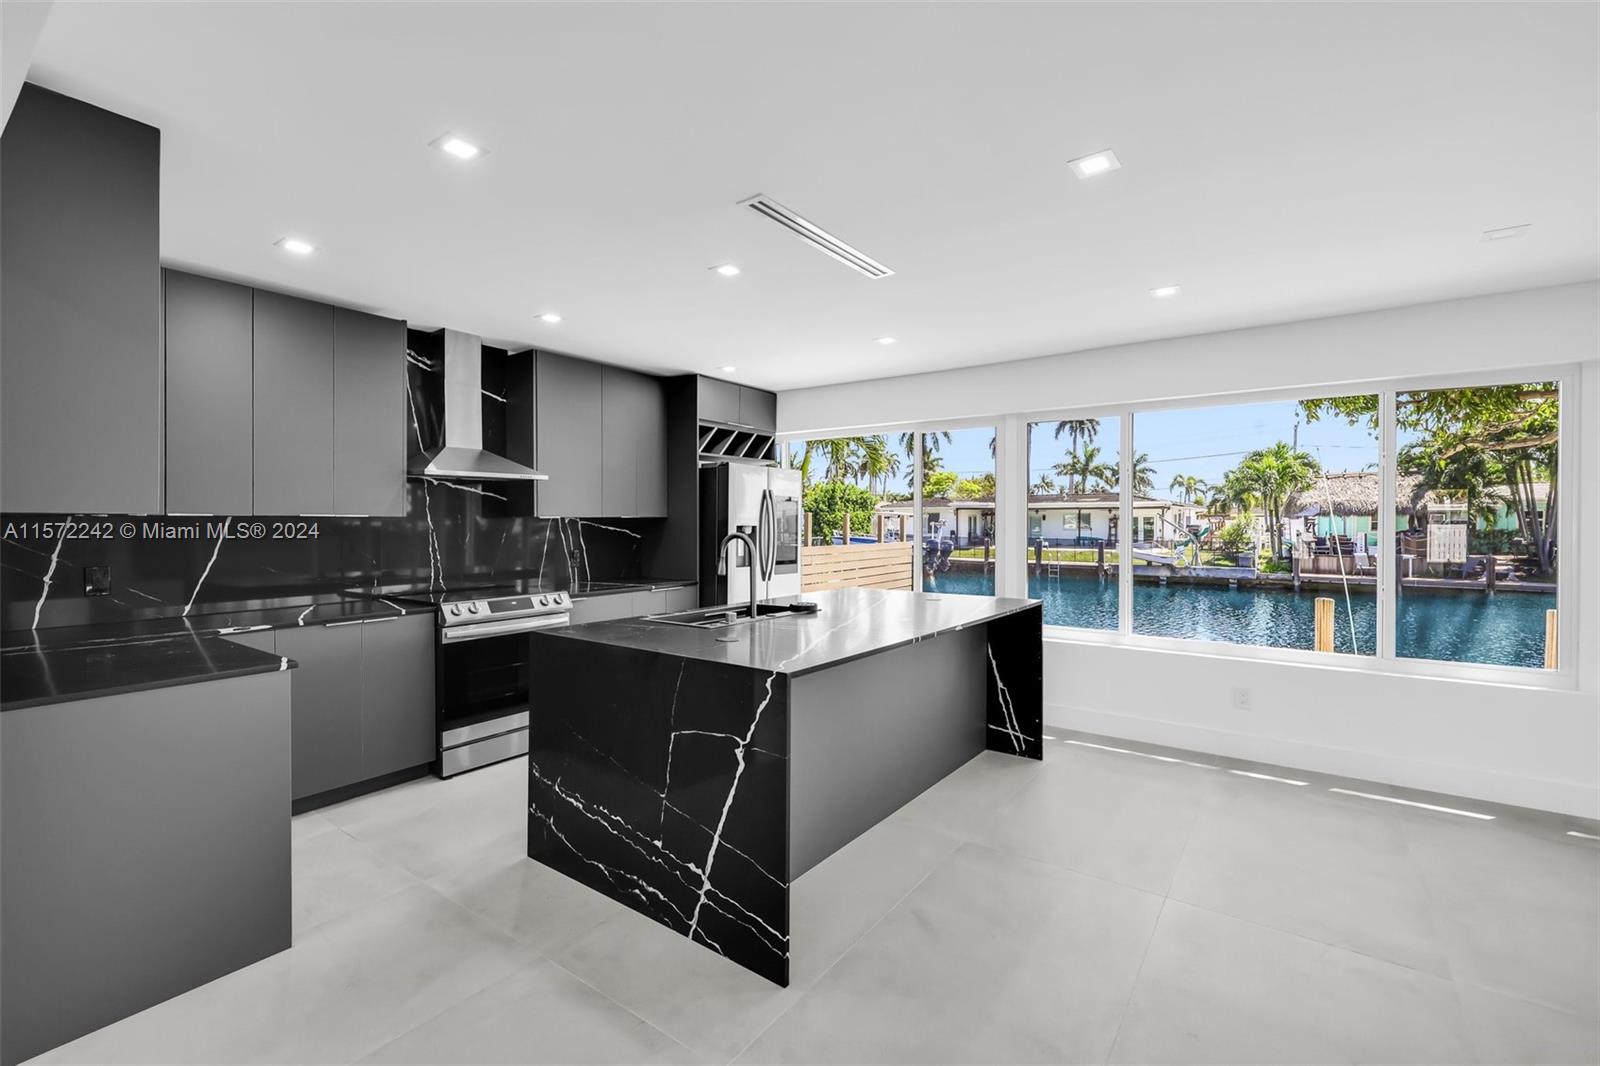 BRAND NEW ROOF, BRAND NEW AC, ALL IMPACT WINDOWS. This stunning property has undergone a meticulous transformation revealing a masterpiece of modern living with 70 ft of water frontage & ocean access. Every inch of this residence has been thoughtfully reimagined. The heart of this home is its modern kitchen & open layout with tile floors, plenty of natural light creating a bright & welcoming ambiance. Step outside to the expansive outdoor oasis, where the enchanting melody of the water complements the generously sized patio invites al fresco dining while the private dock offers a gateway to endless nautical adventures. Pool installation is negotiable.